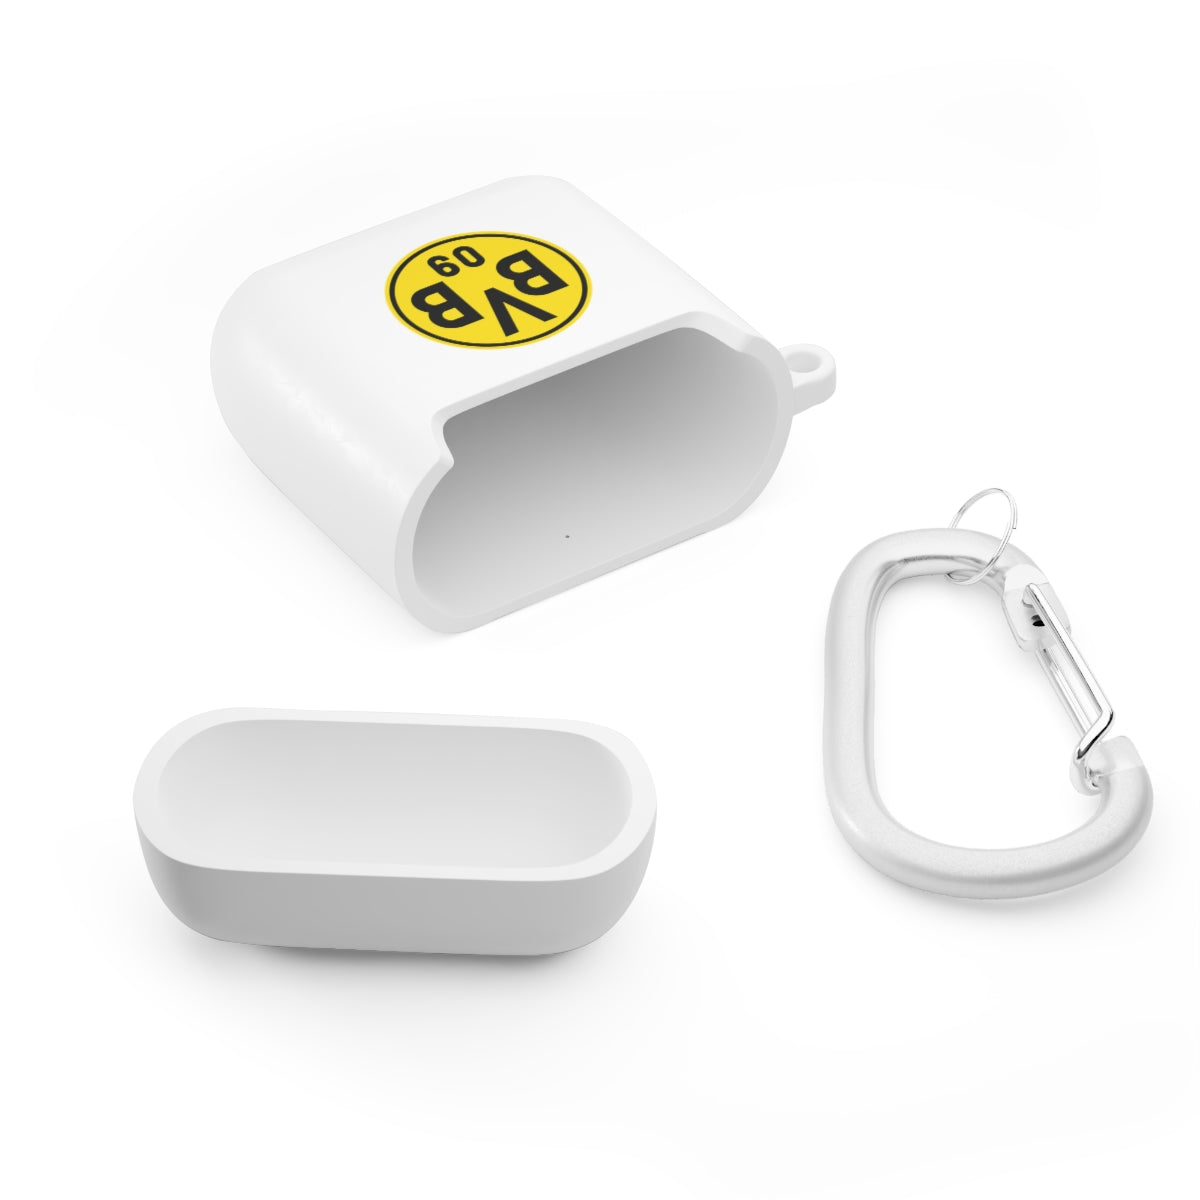 BVB AirPods and AirPods Pro Case Cover